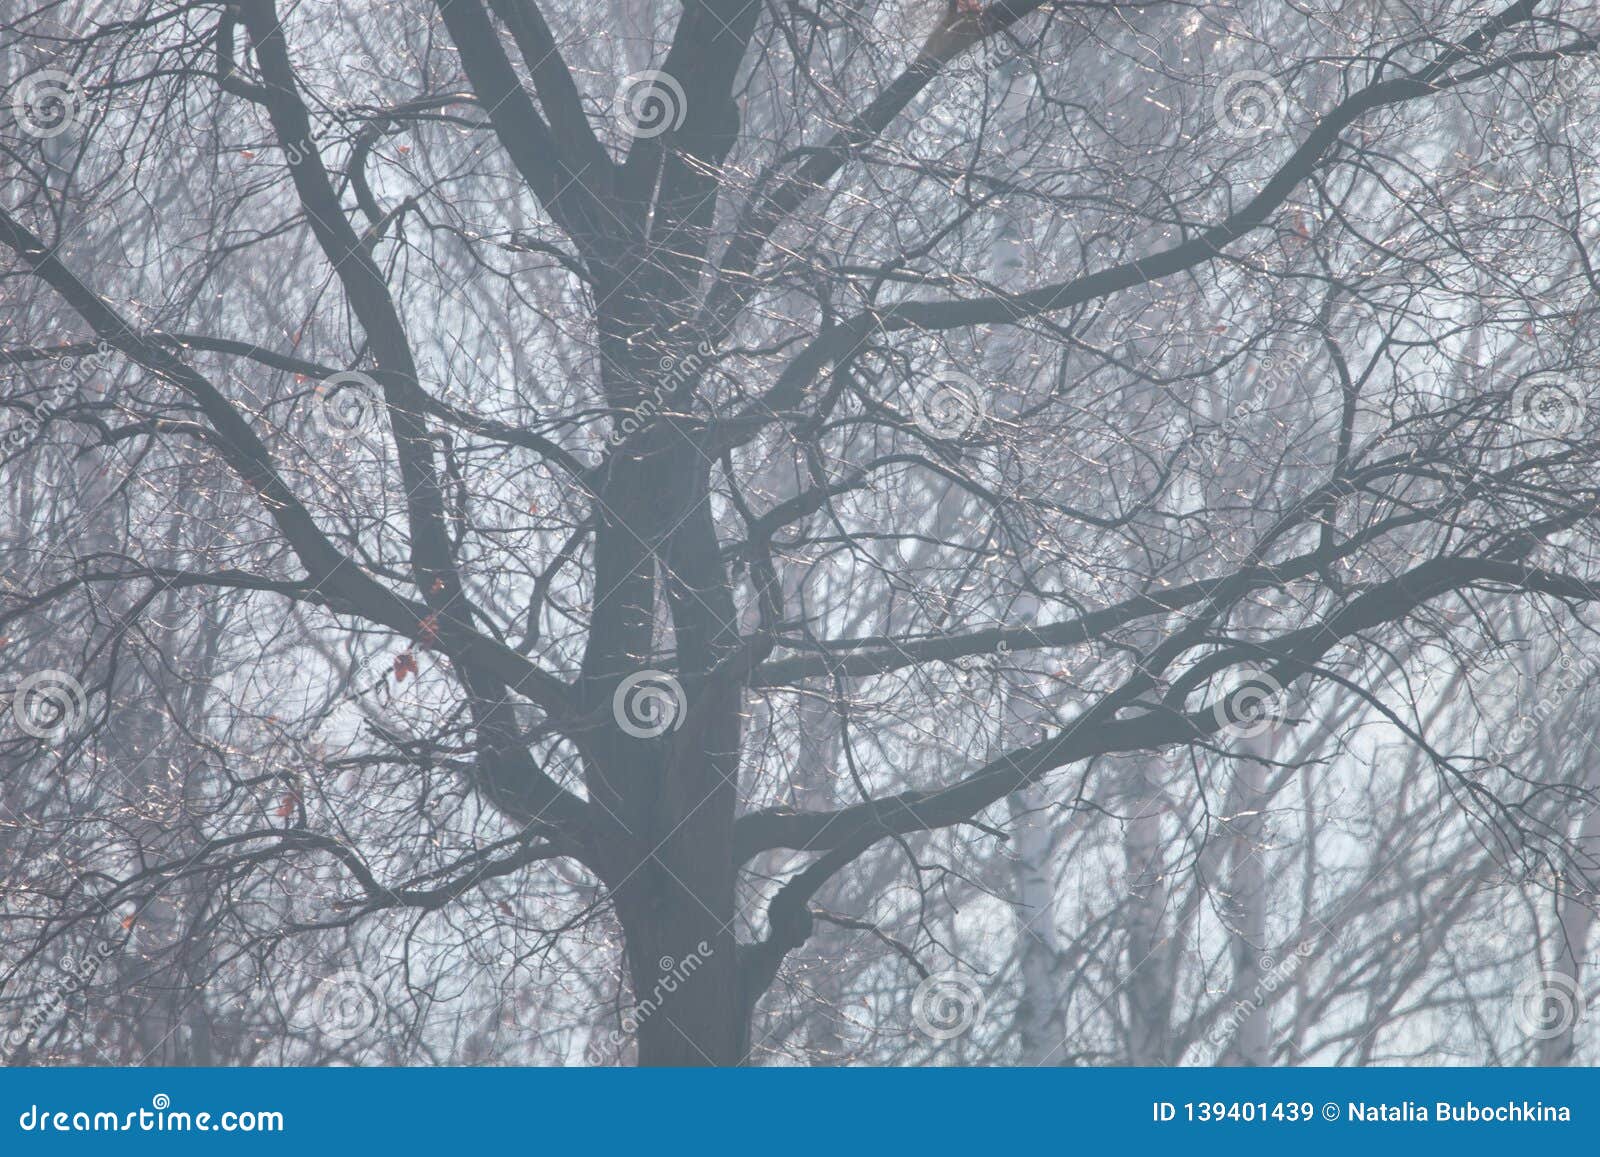 Bare Tree Silhouette on Foggy Day Stock Image - Image of season